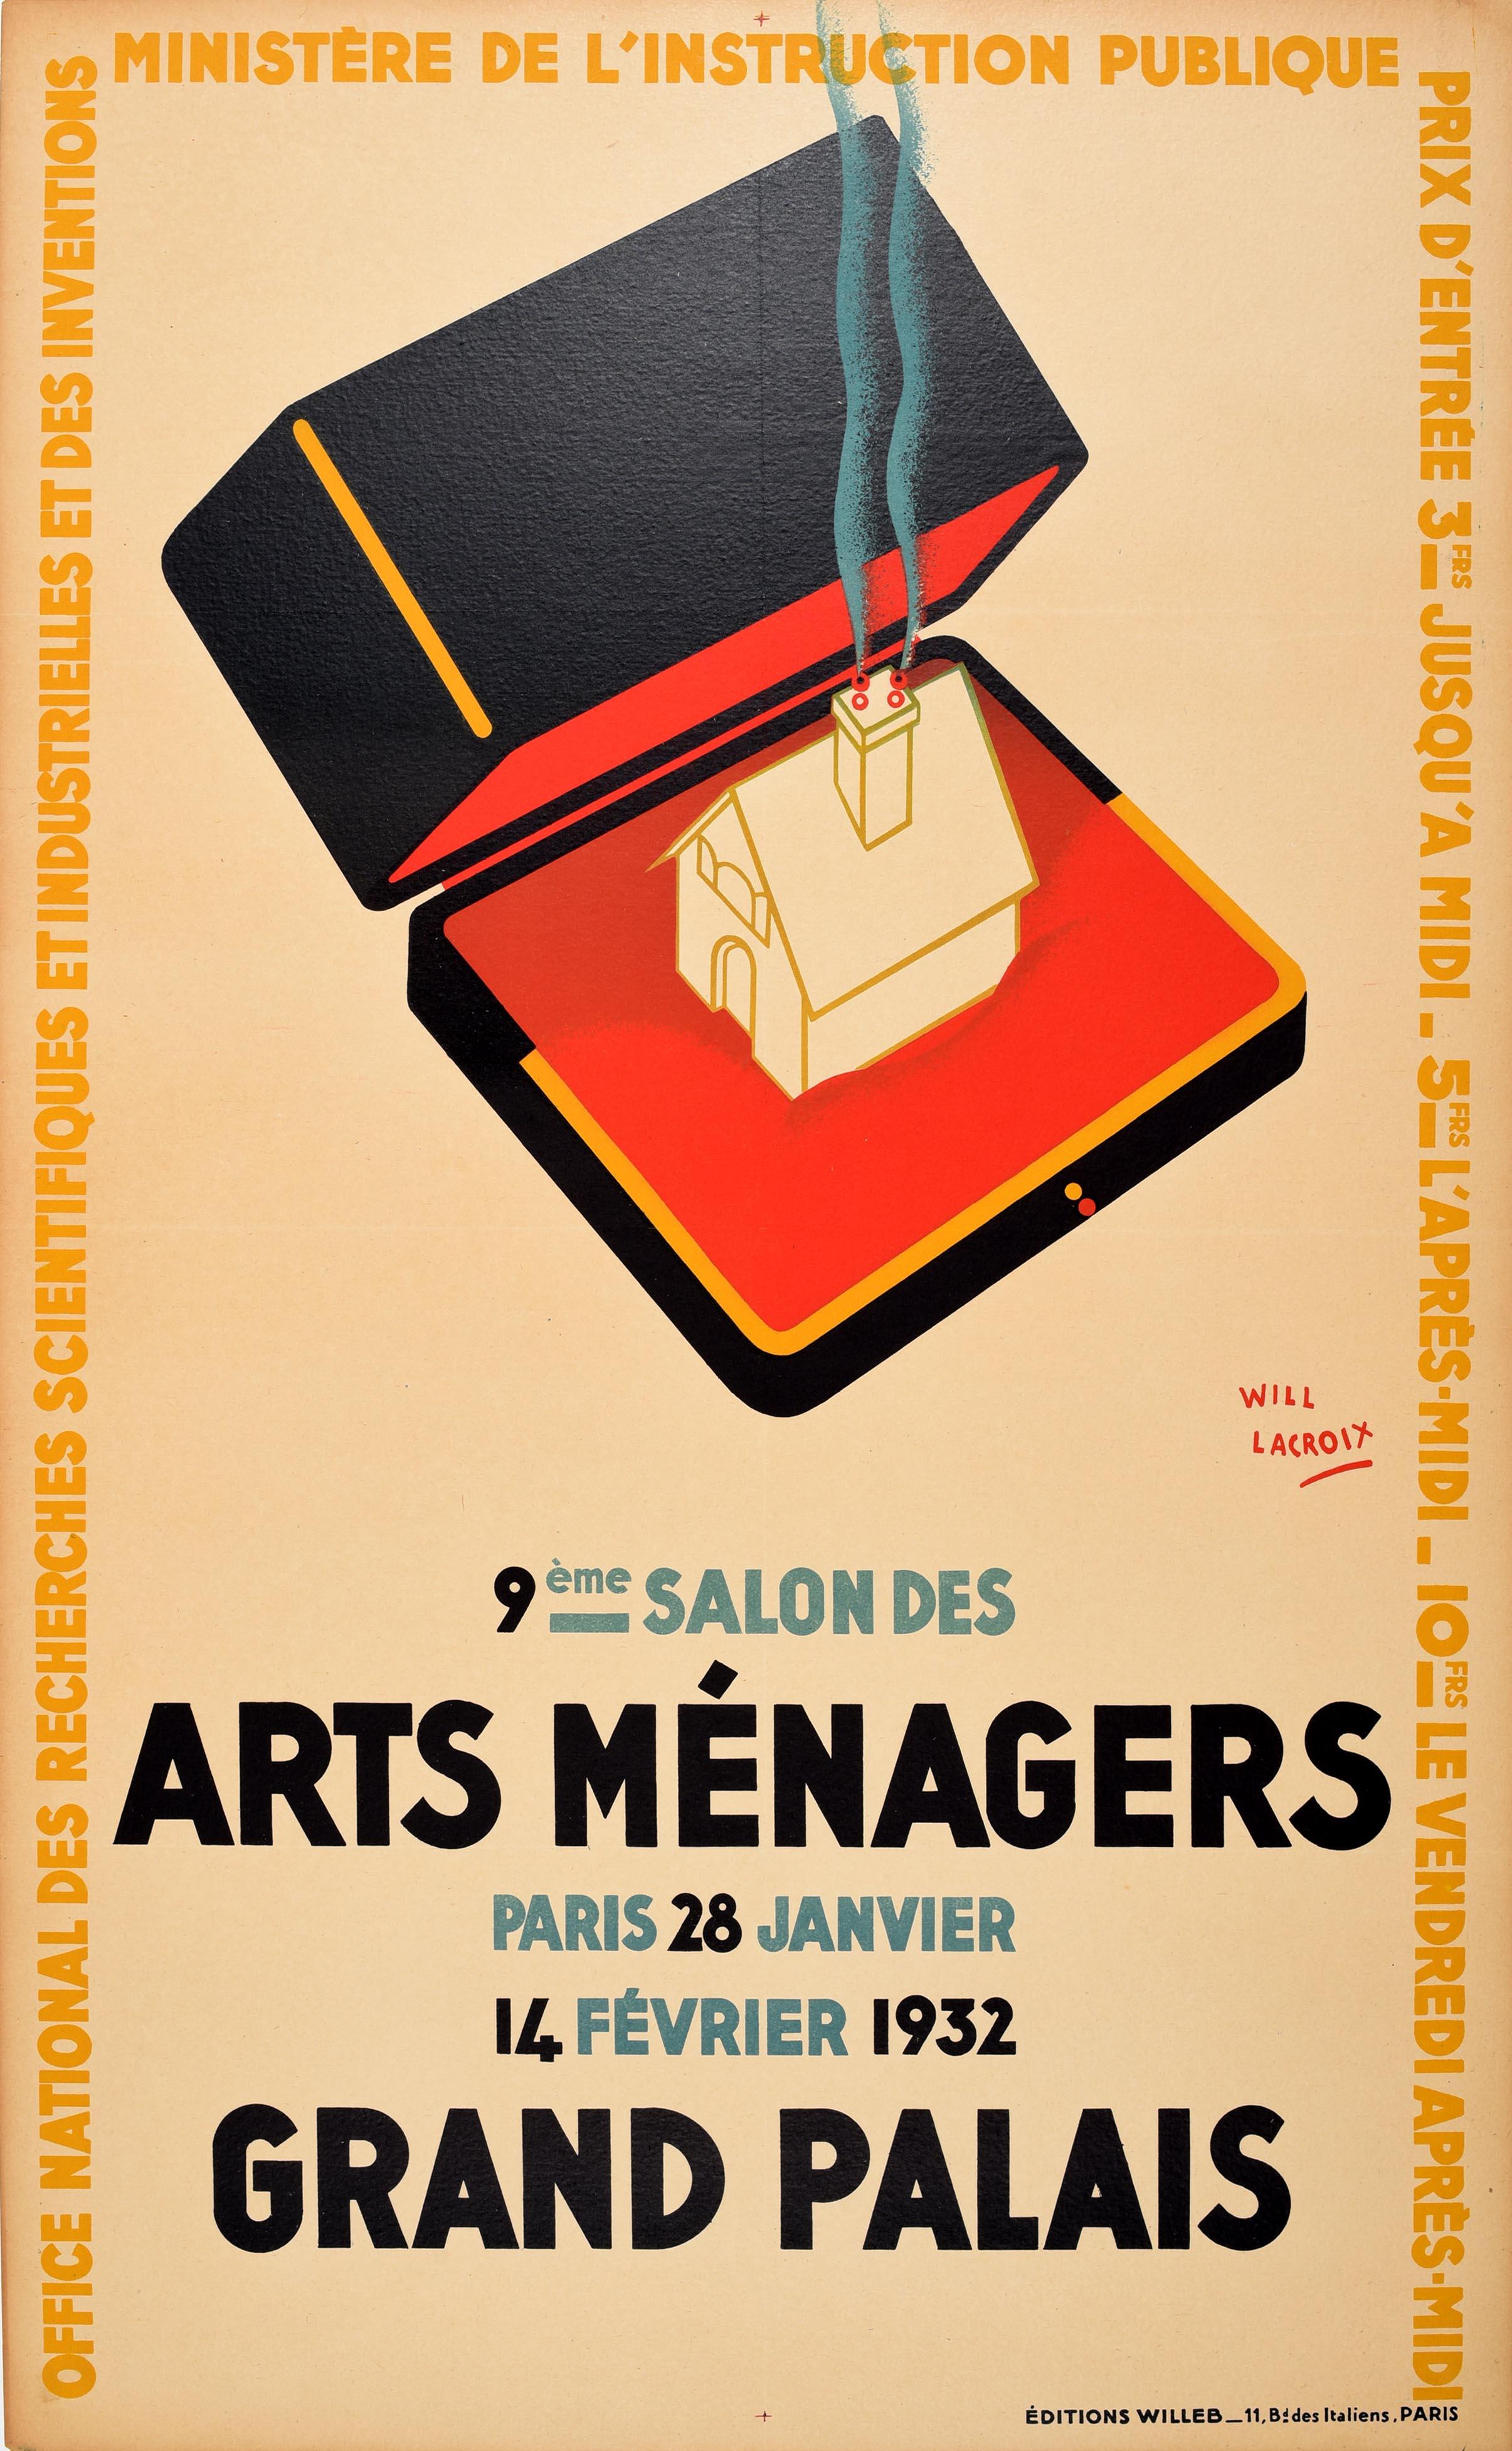 Original vintage exhibition poster advertising the Arts Menagers / Household Arts Show from 28 January to 14 February 1932 at the Grand Palais Paris featuring a great Art Deco design of a house inside a open ring box with the stylised lettering